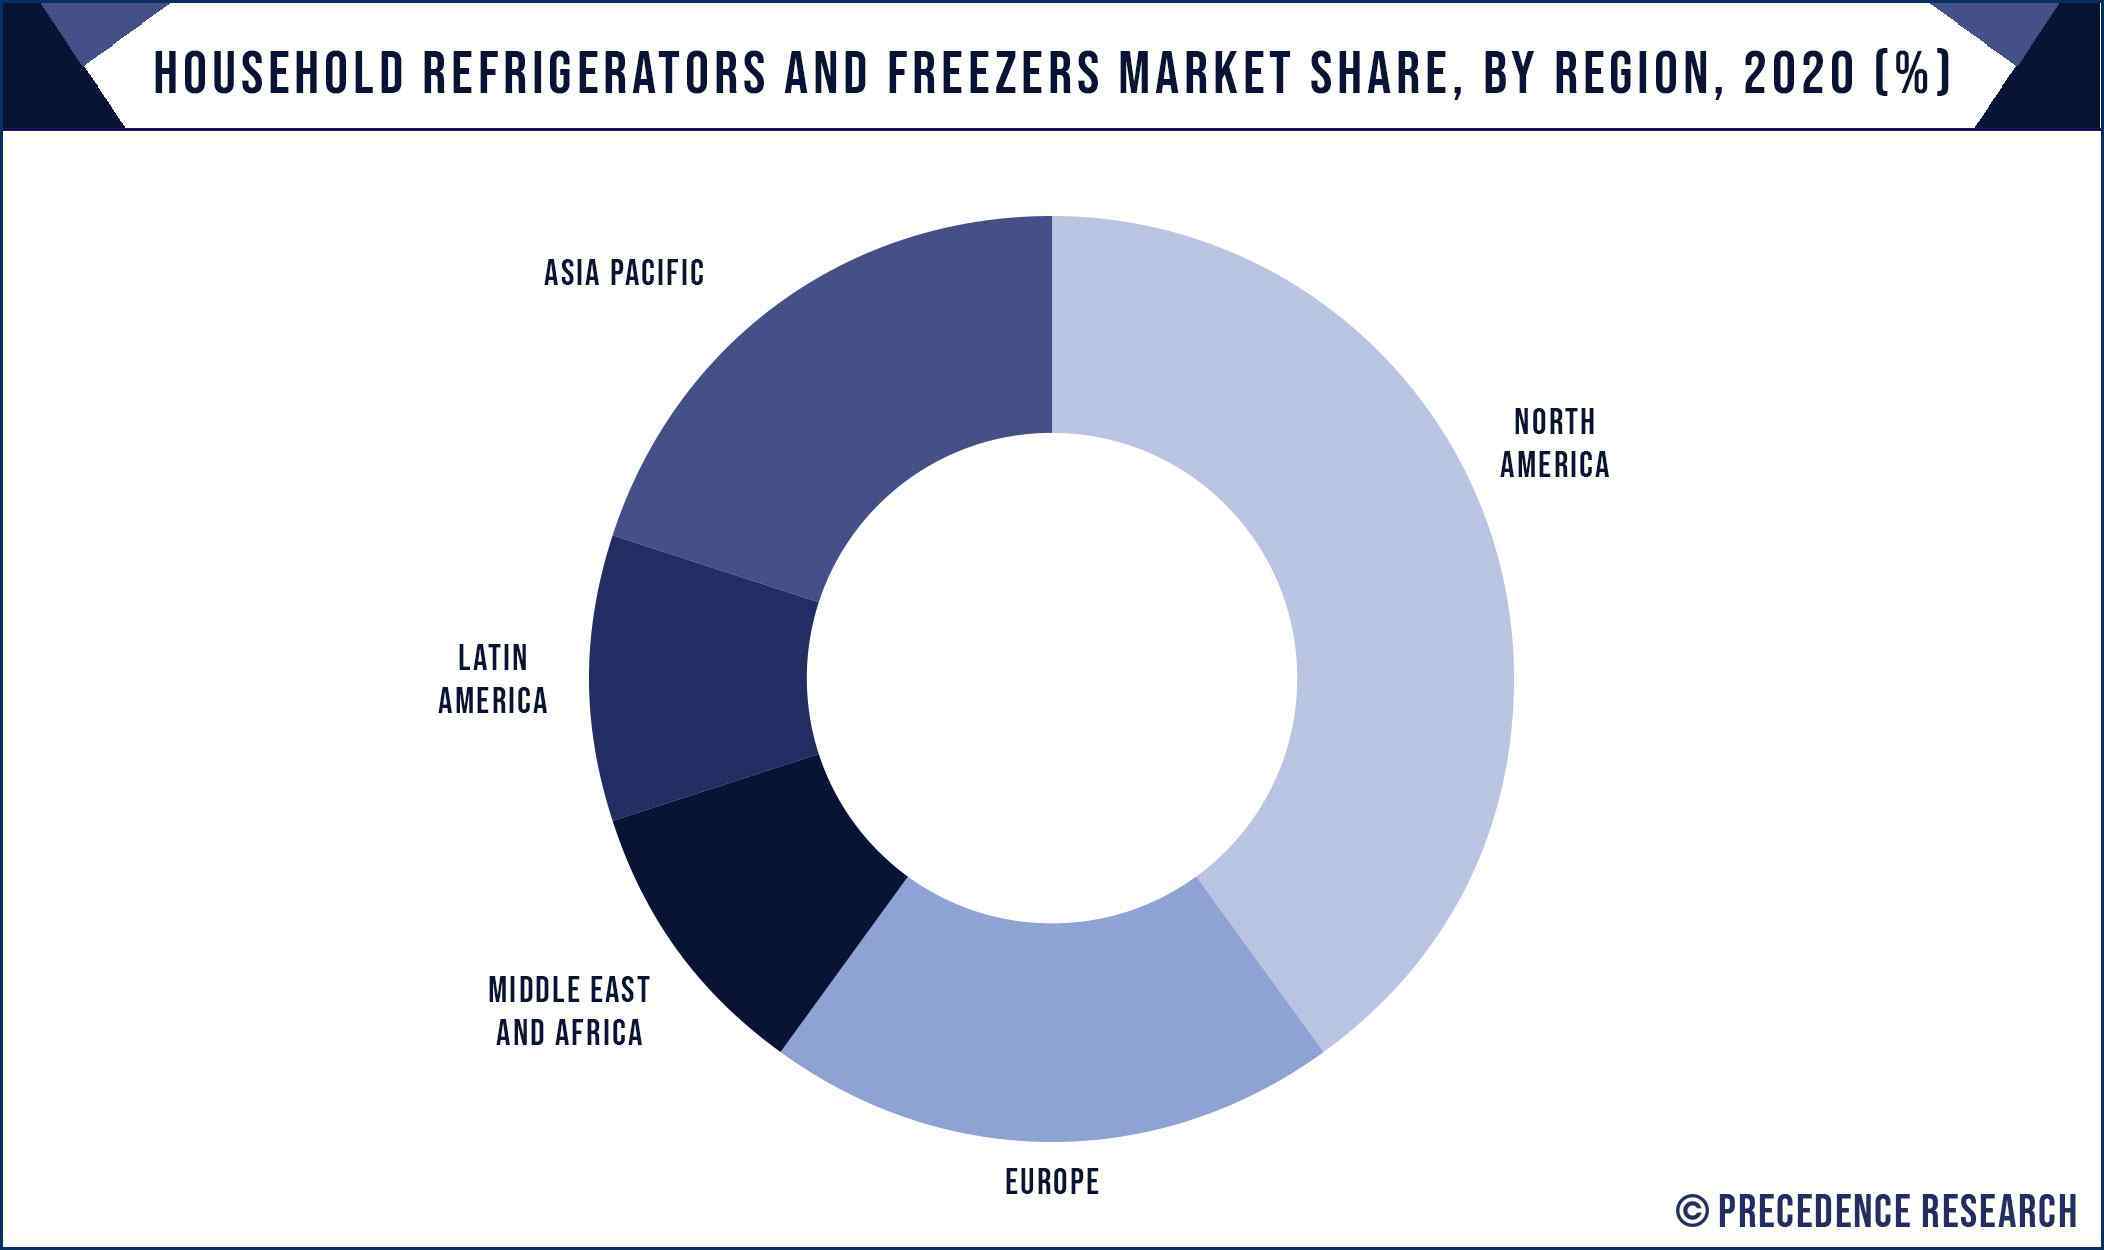 Household Refrigerators and Freezers Market Share, By Region, 2020 (%)